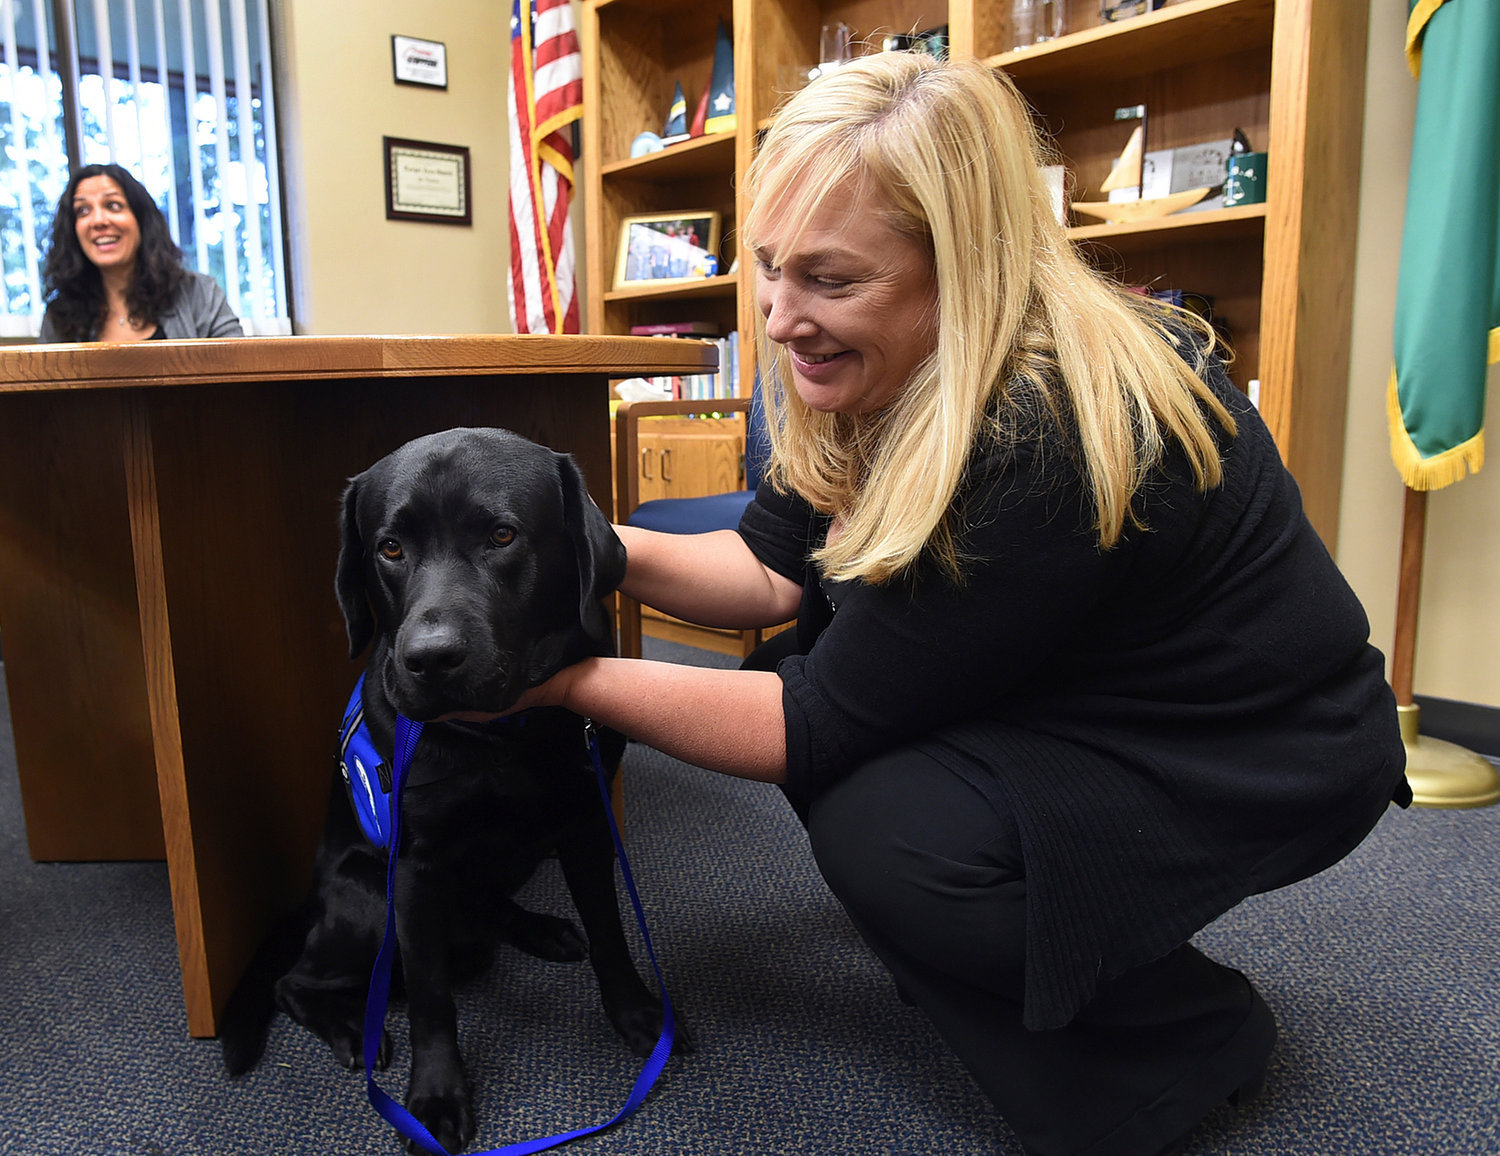 Kim Carroll, the senior victim advocate for the Thurston County Courts shows "Marshal," the new courthouse facility dog, as Wendy Ireland, the Legal Support Coordinator and caretaker of Marshal outlines the program in Olympia, Wash., Thursday, Dec. 24, 2015. The 2-year-old black lab has been specially trained to comfort crime victims at the county courthouse. (Steve Bloom/The Olympian via AP)